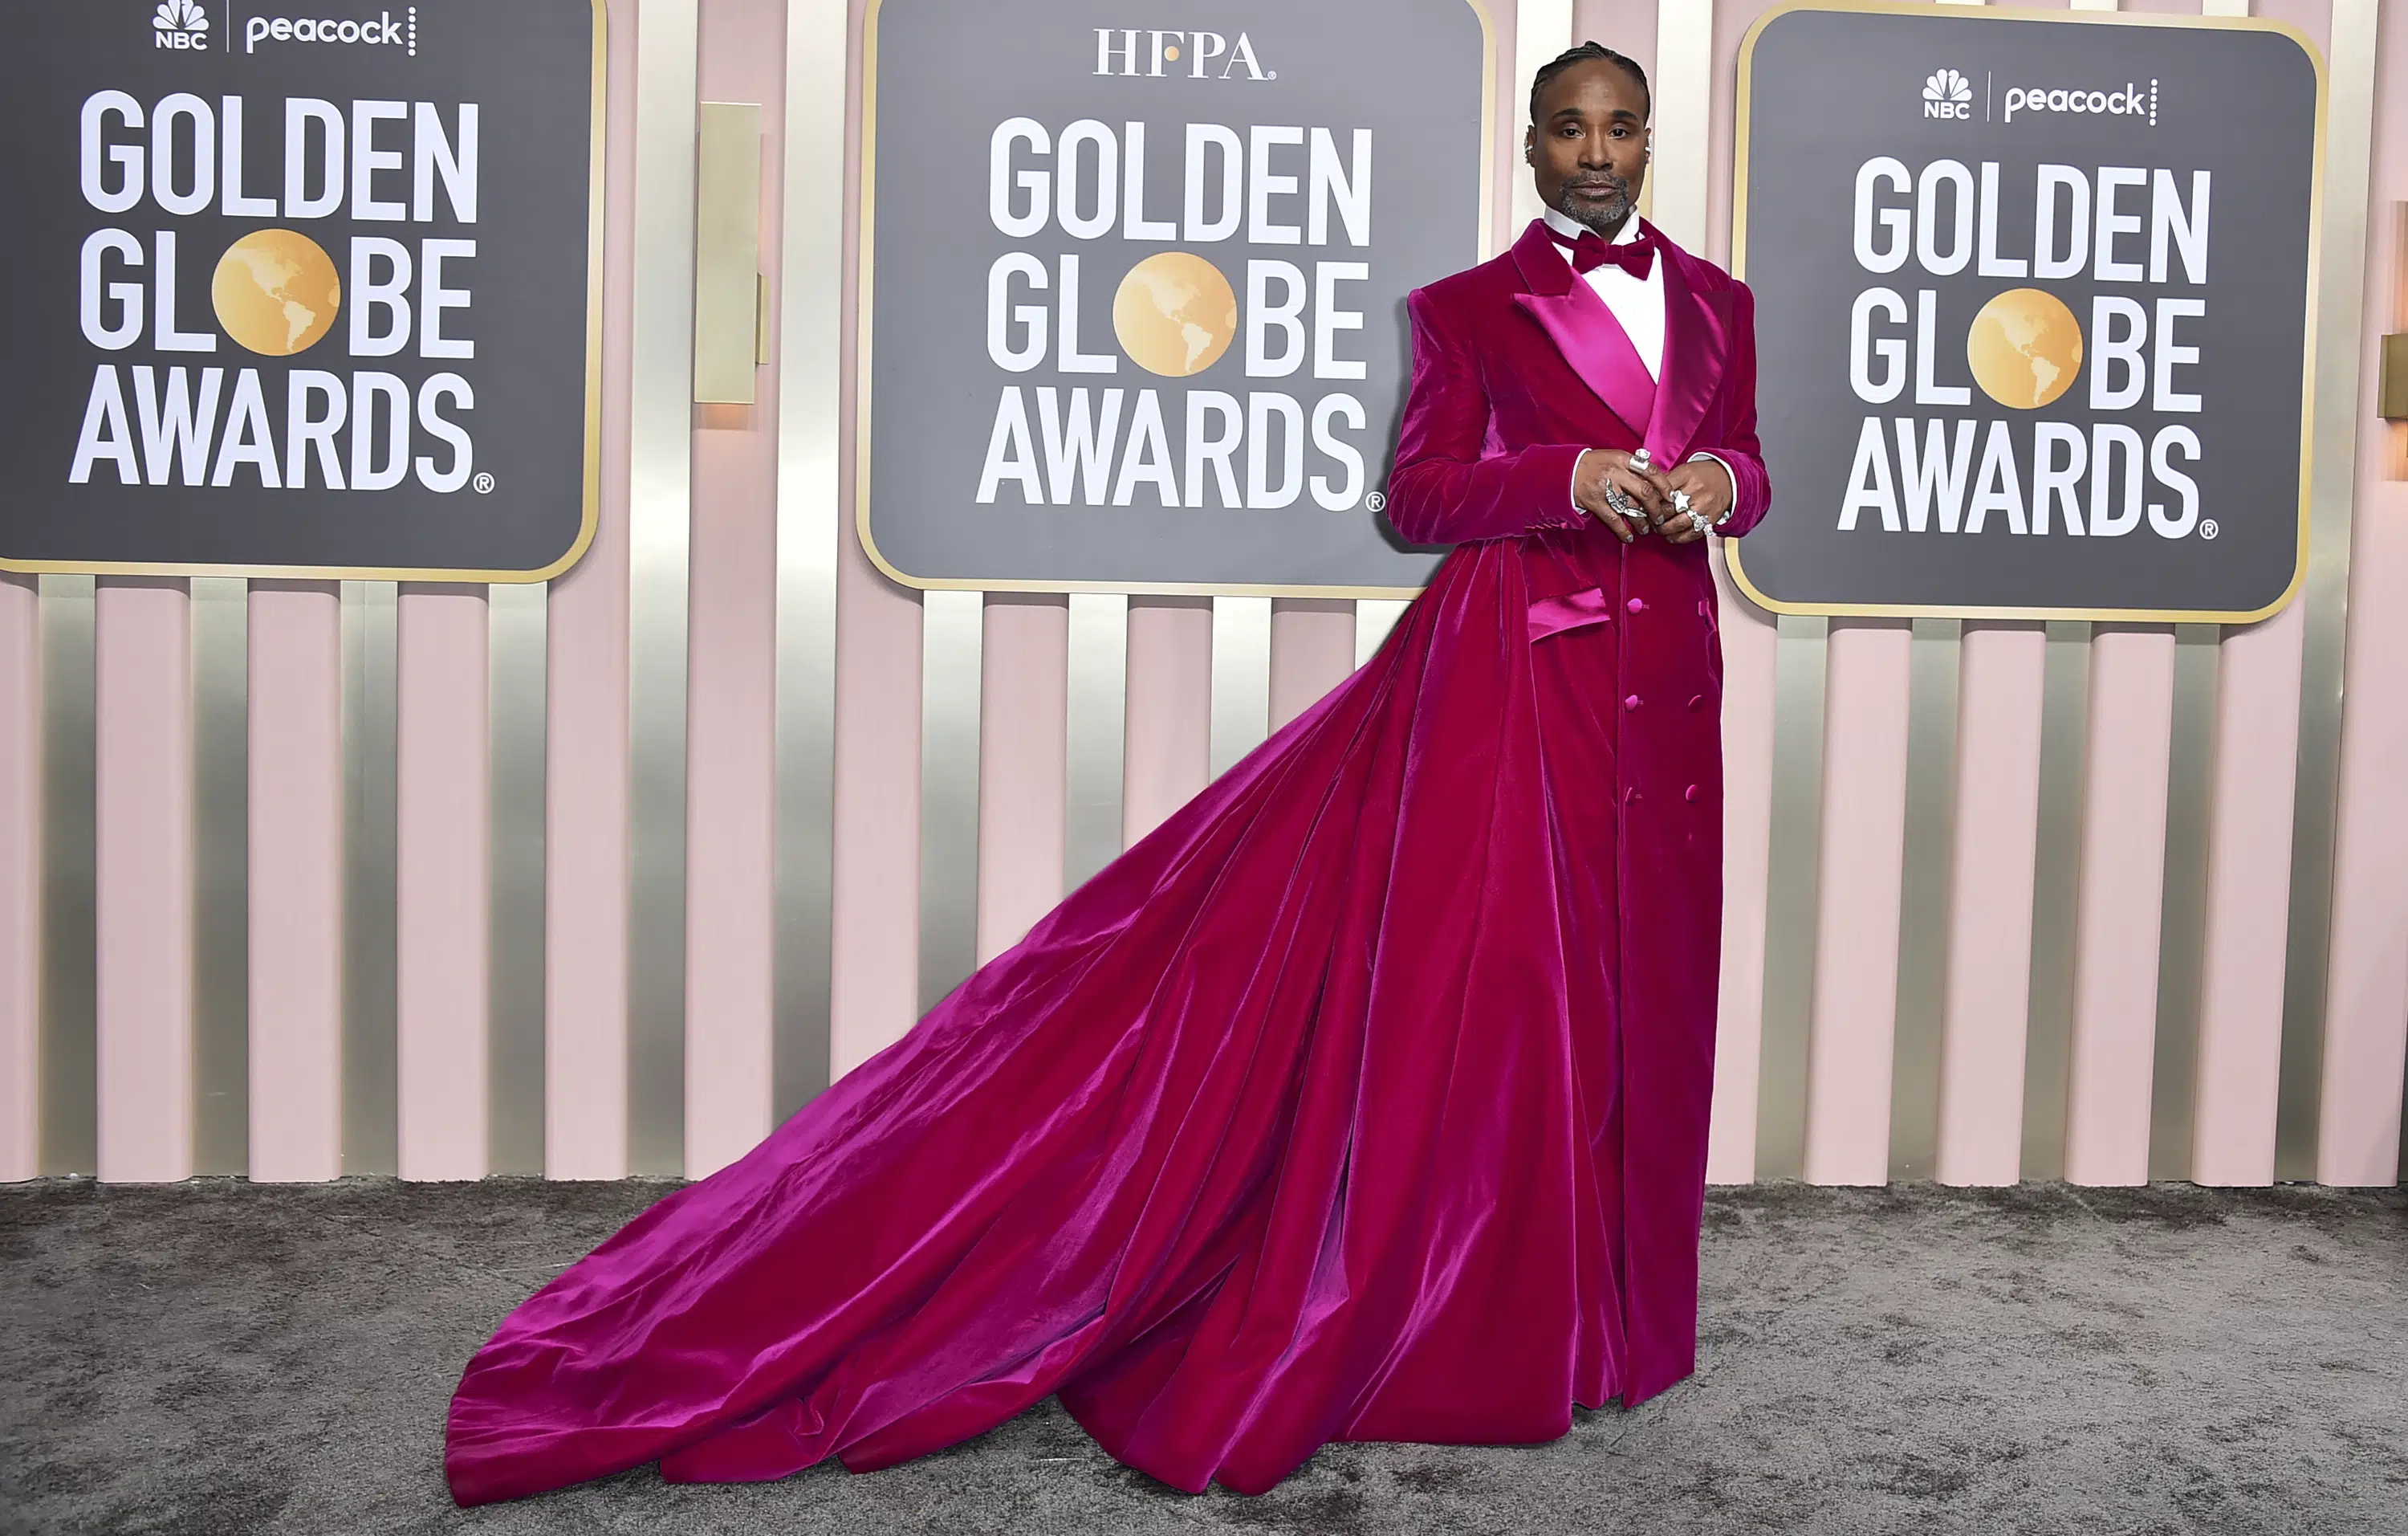 Golden Globes fashion: See the best red carpet looks